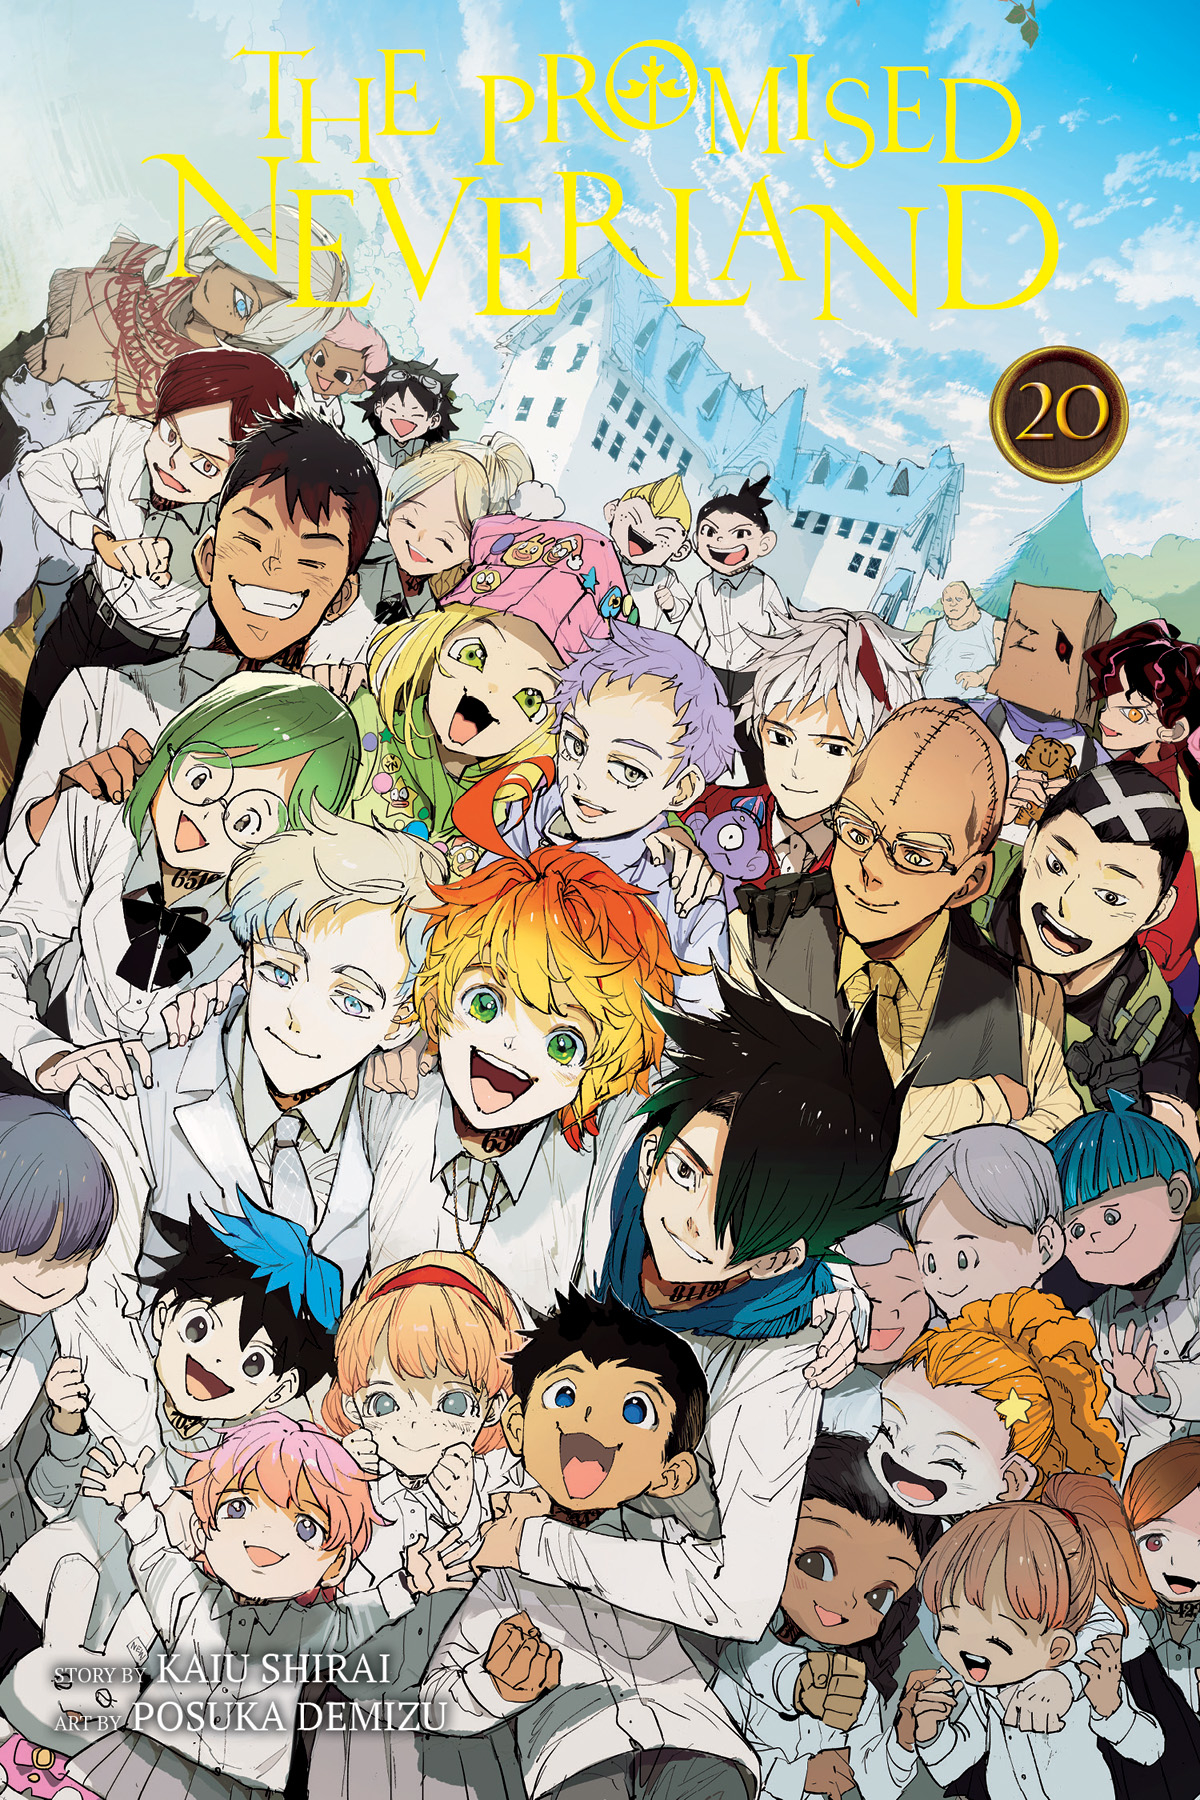 Buy Promised Neverland Graphic Novel Volume 20 Mission Comics And Art 